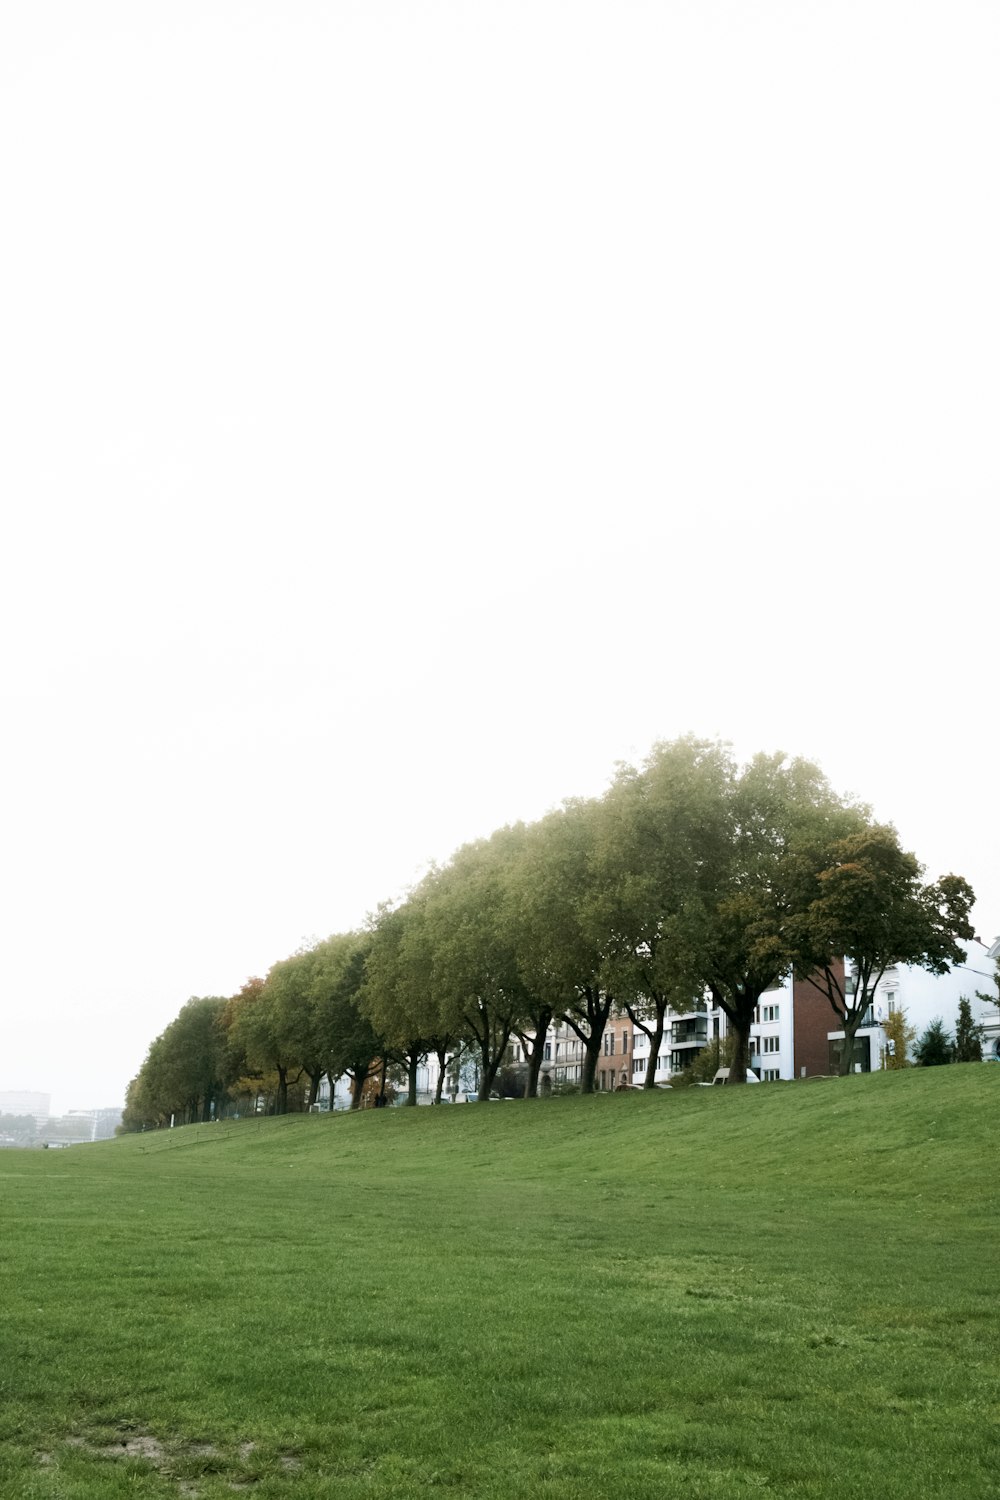 a group of trees on a grassy hill